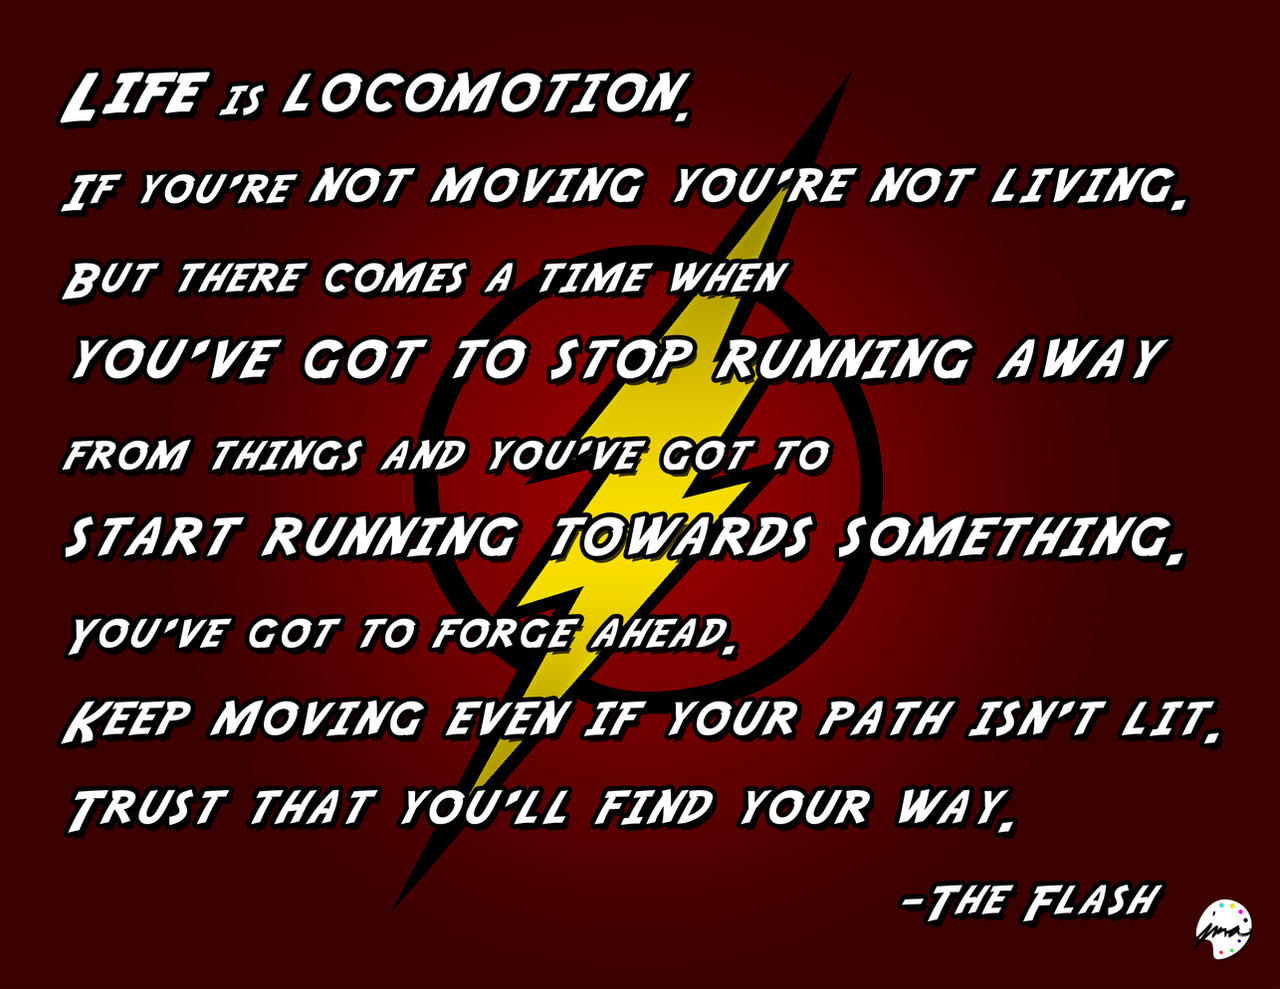 The Flash Quote 2015 by jmalfonso7